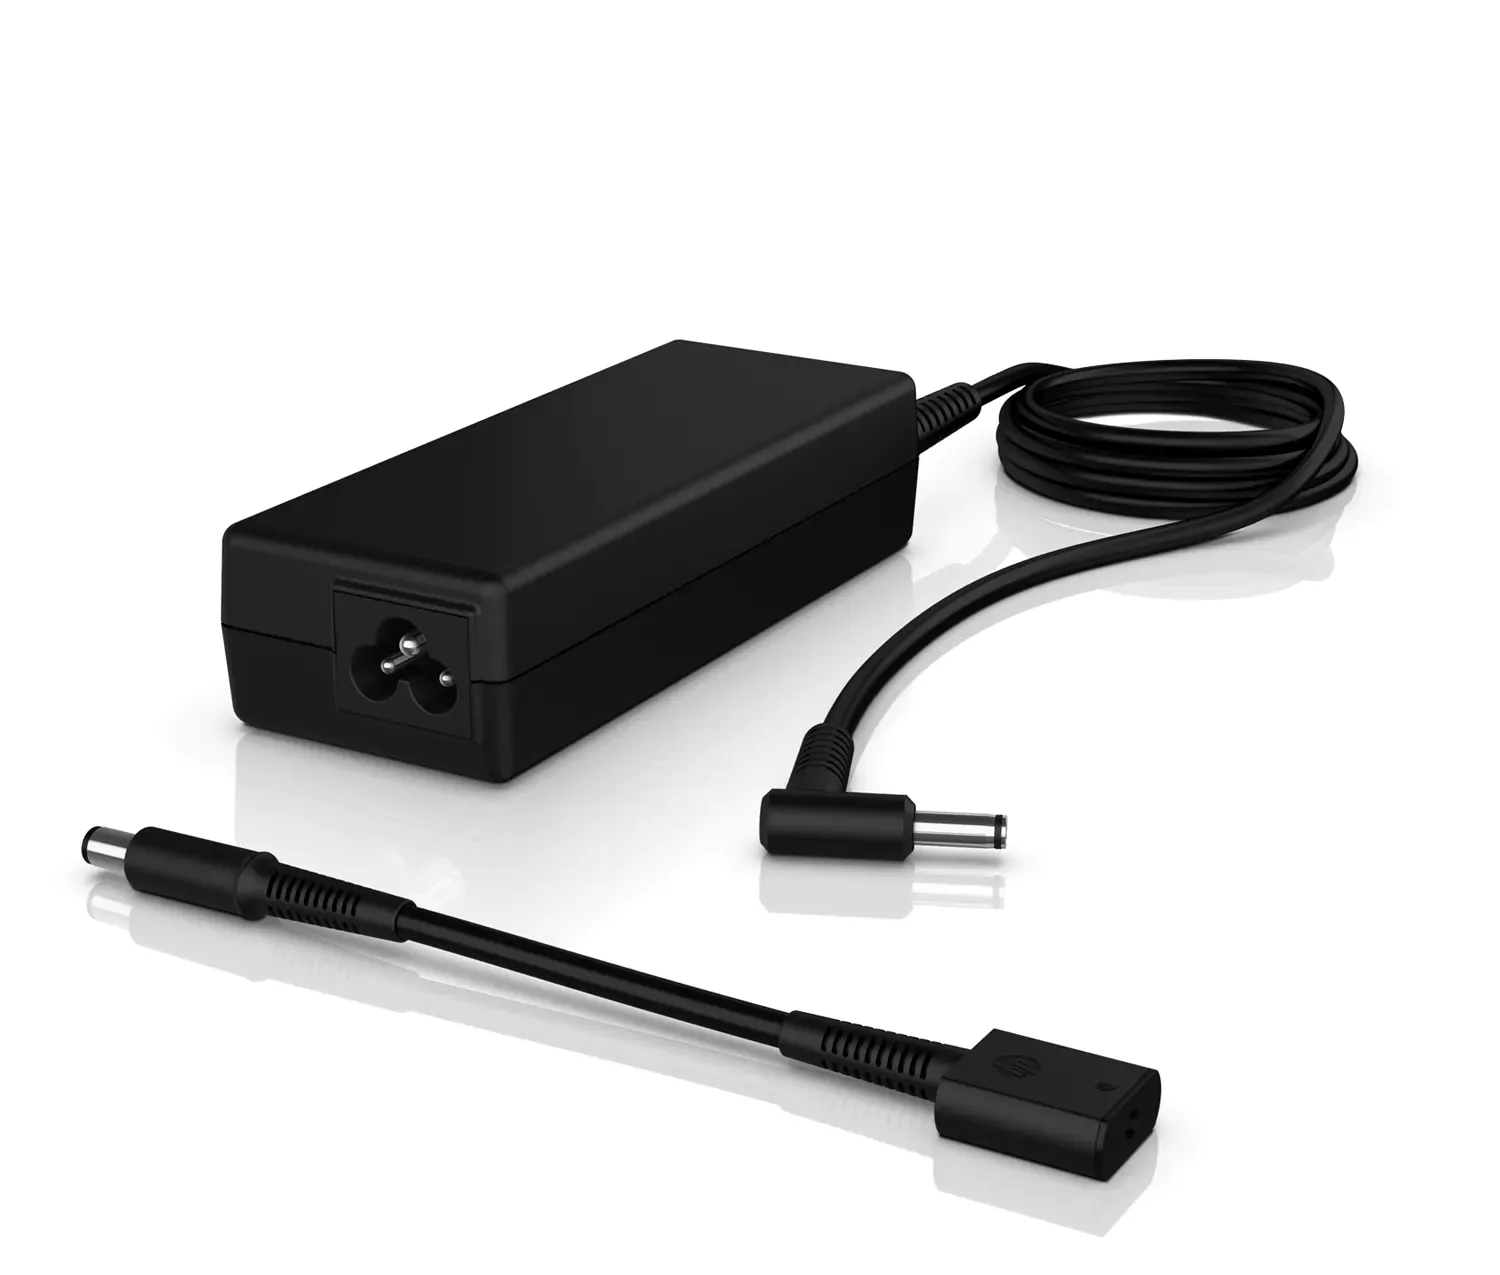 The 16-inch model of the Spectre x360 is a bit more power-hungry, so you're going to need a more powerful adapter, like this 90W adapter from HP.  It's a bit chunky, though.